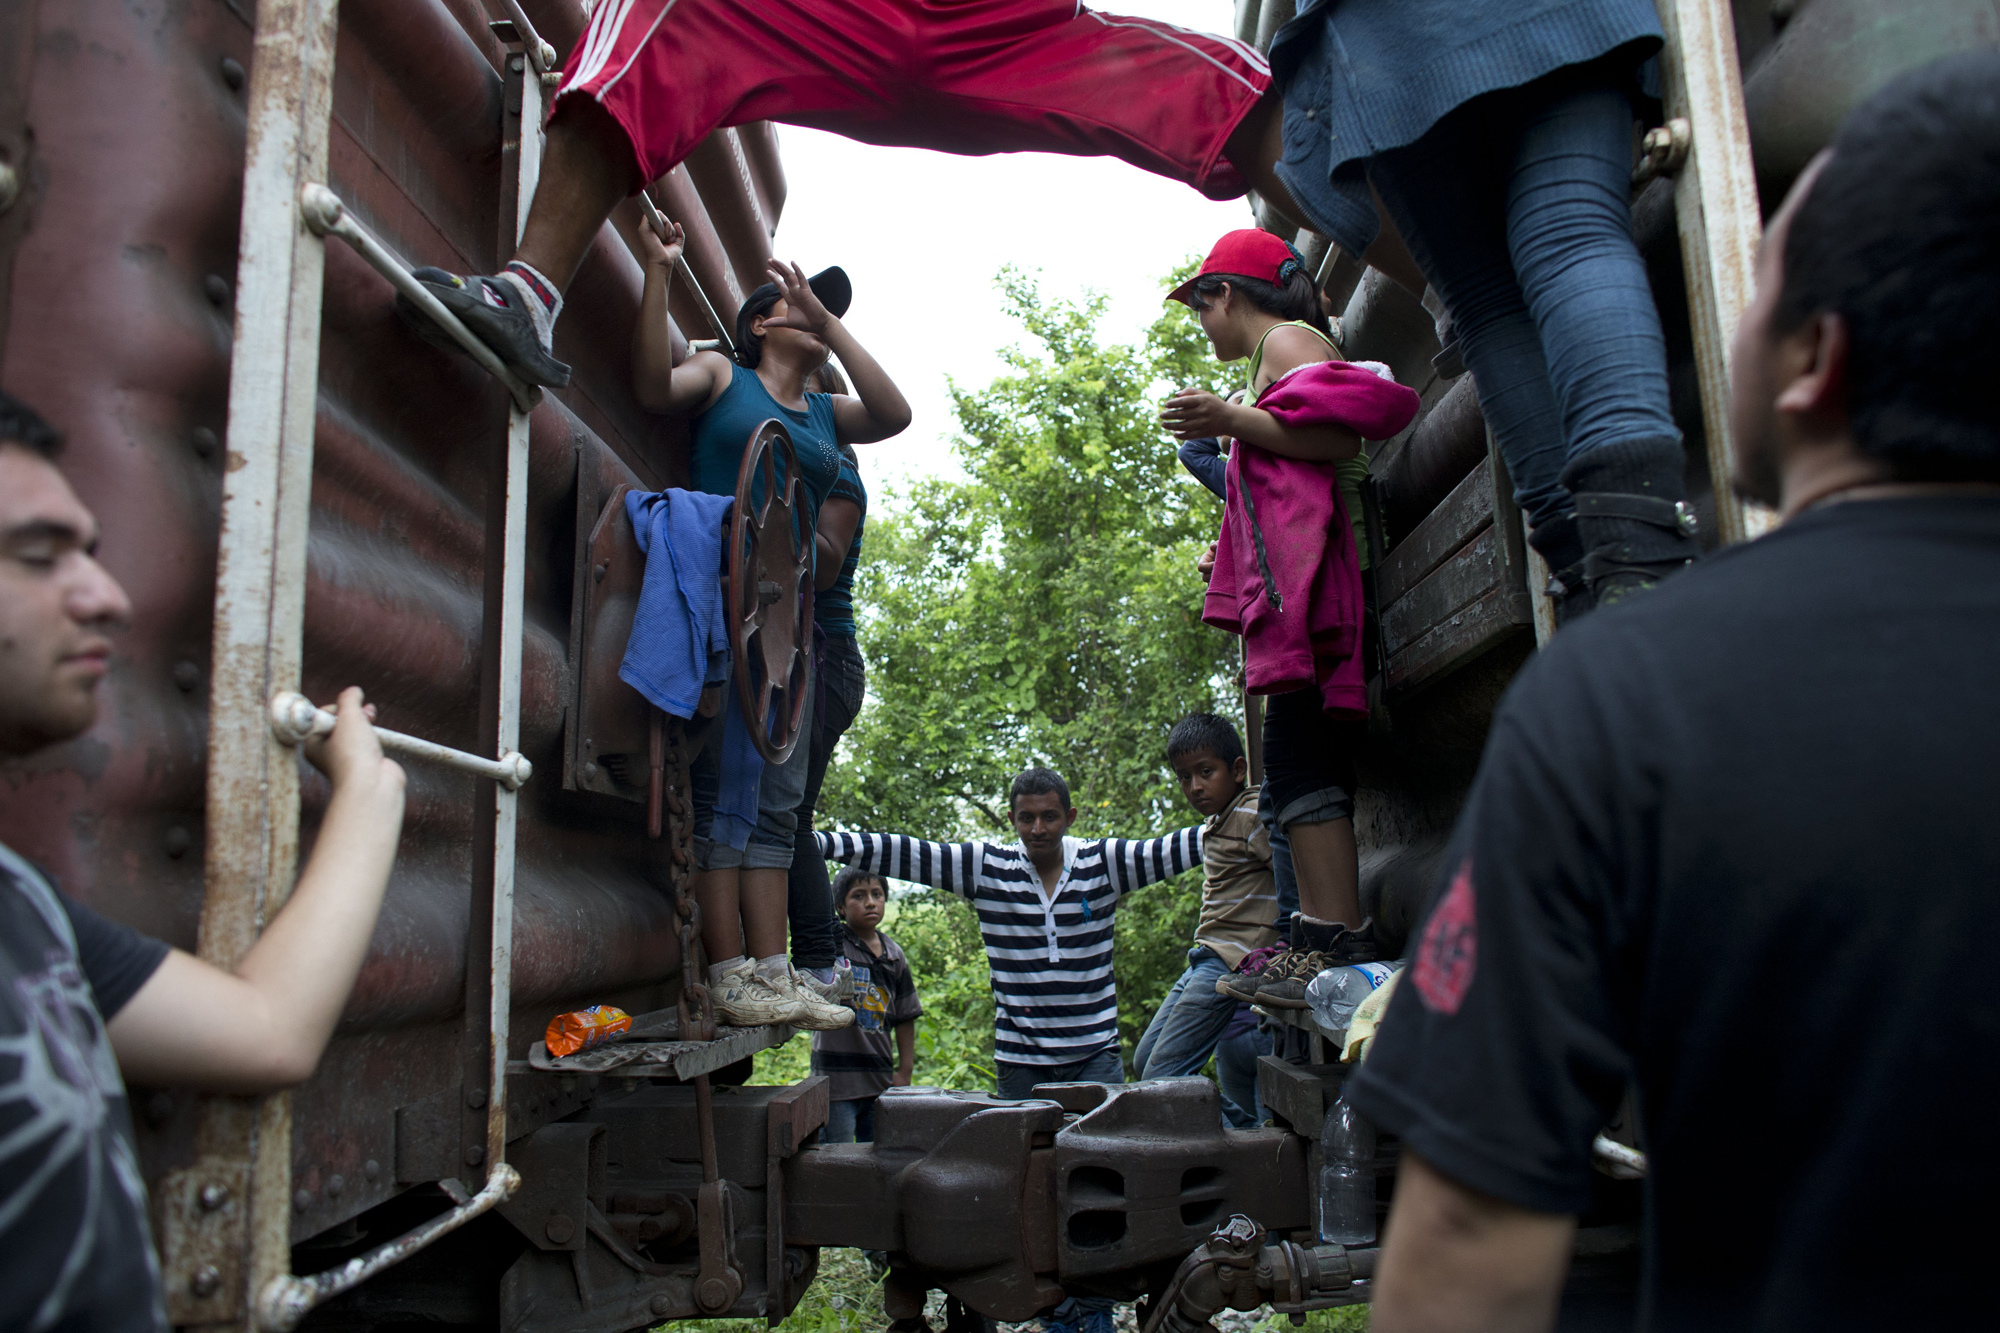 Central American migrants hang out around the northbound freight train they had been traveling on, after it suffered a minor derailment in a remote wooded area outside Reforma de Pineda, Mexico, June 20.